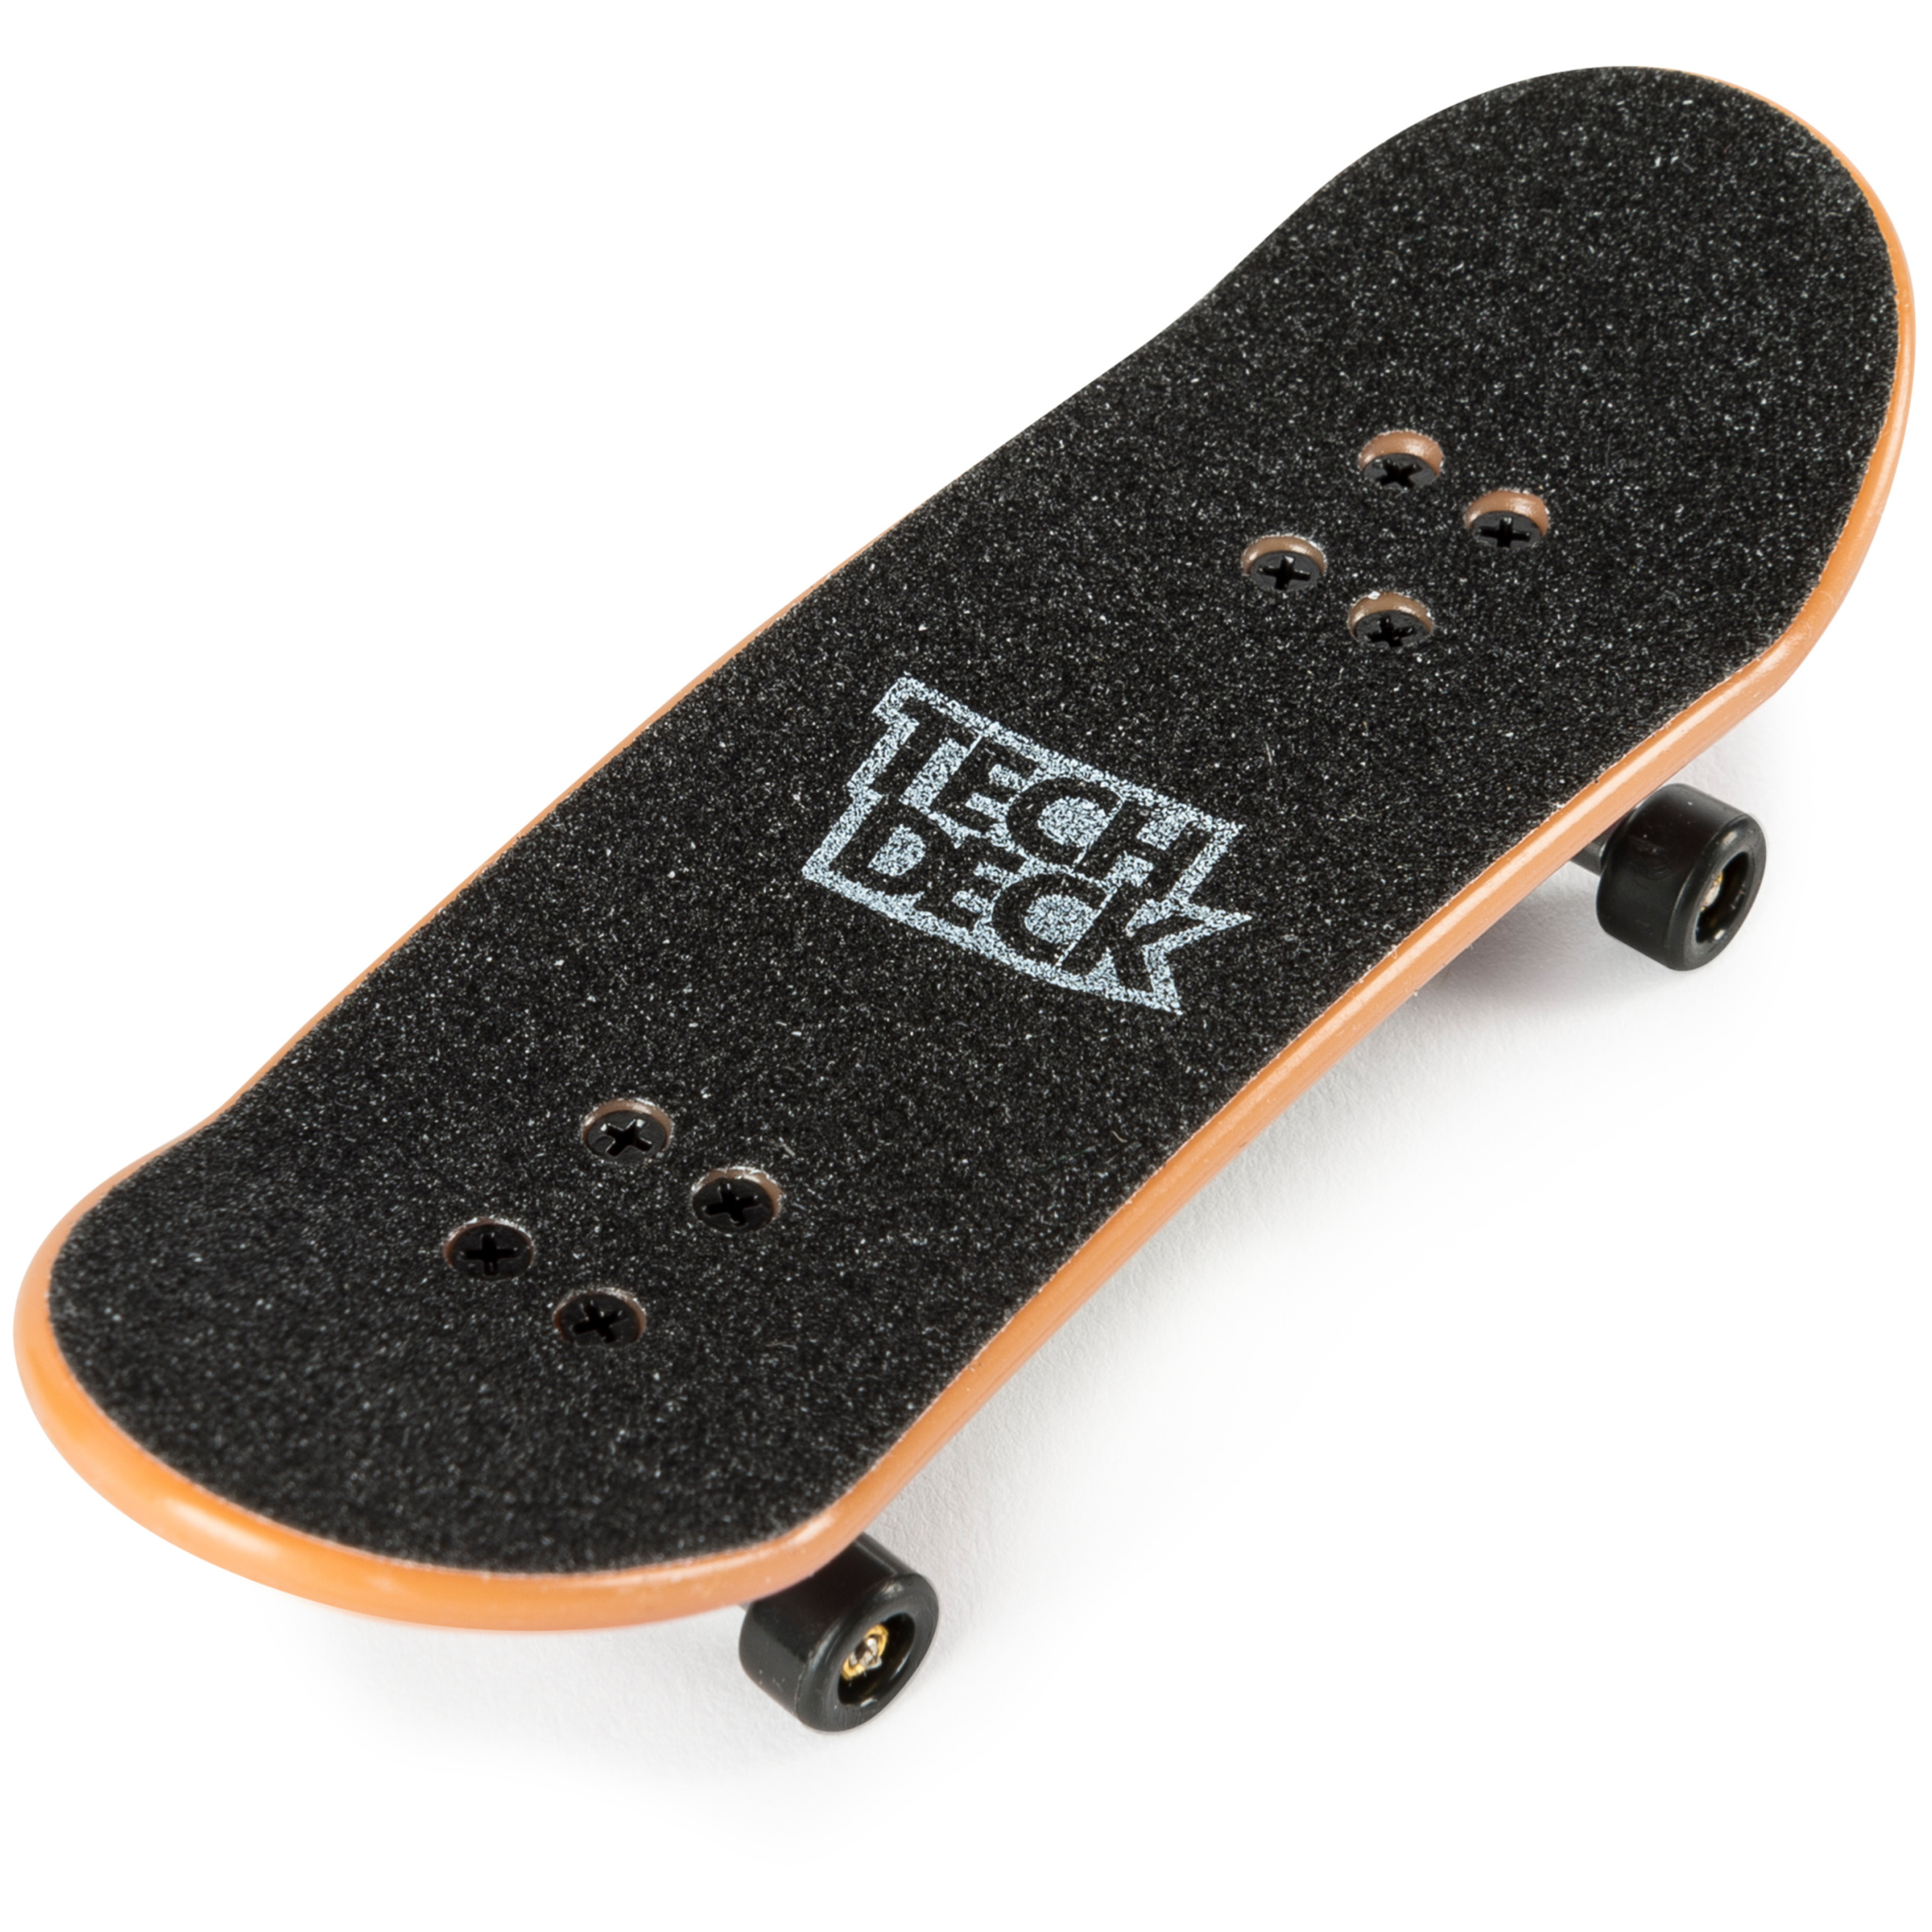 Tech Deck, 96mm Fingerboard Mini Skateboard with Authentic Designs, For Ages 6 and Up (Styles May Vary) - image 4 of 8